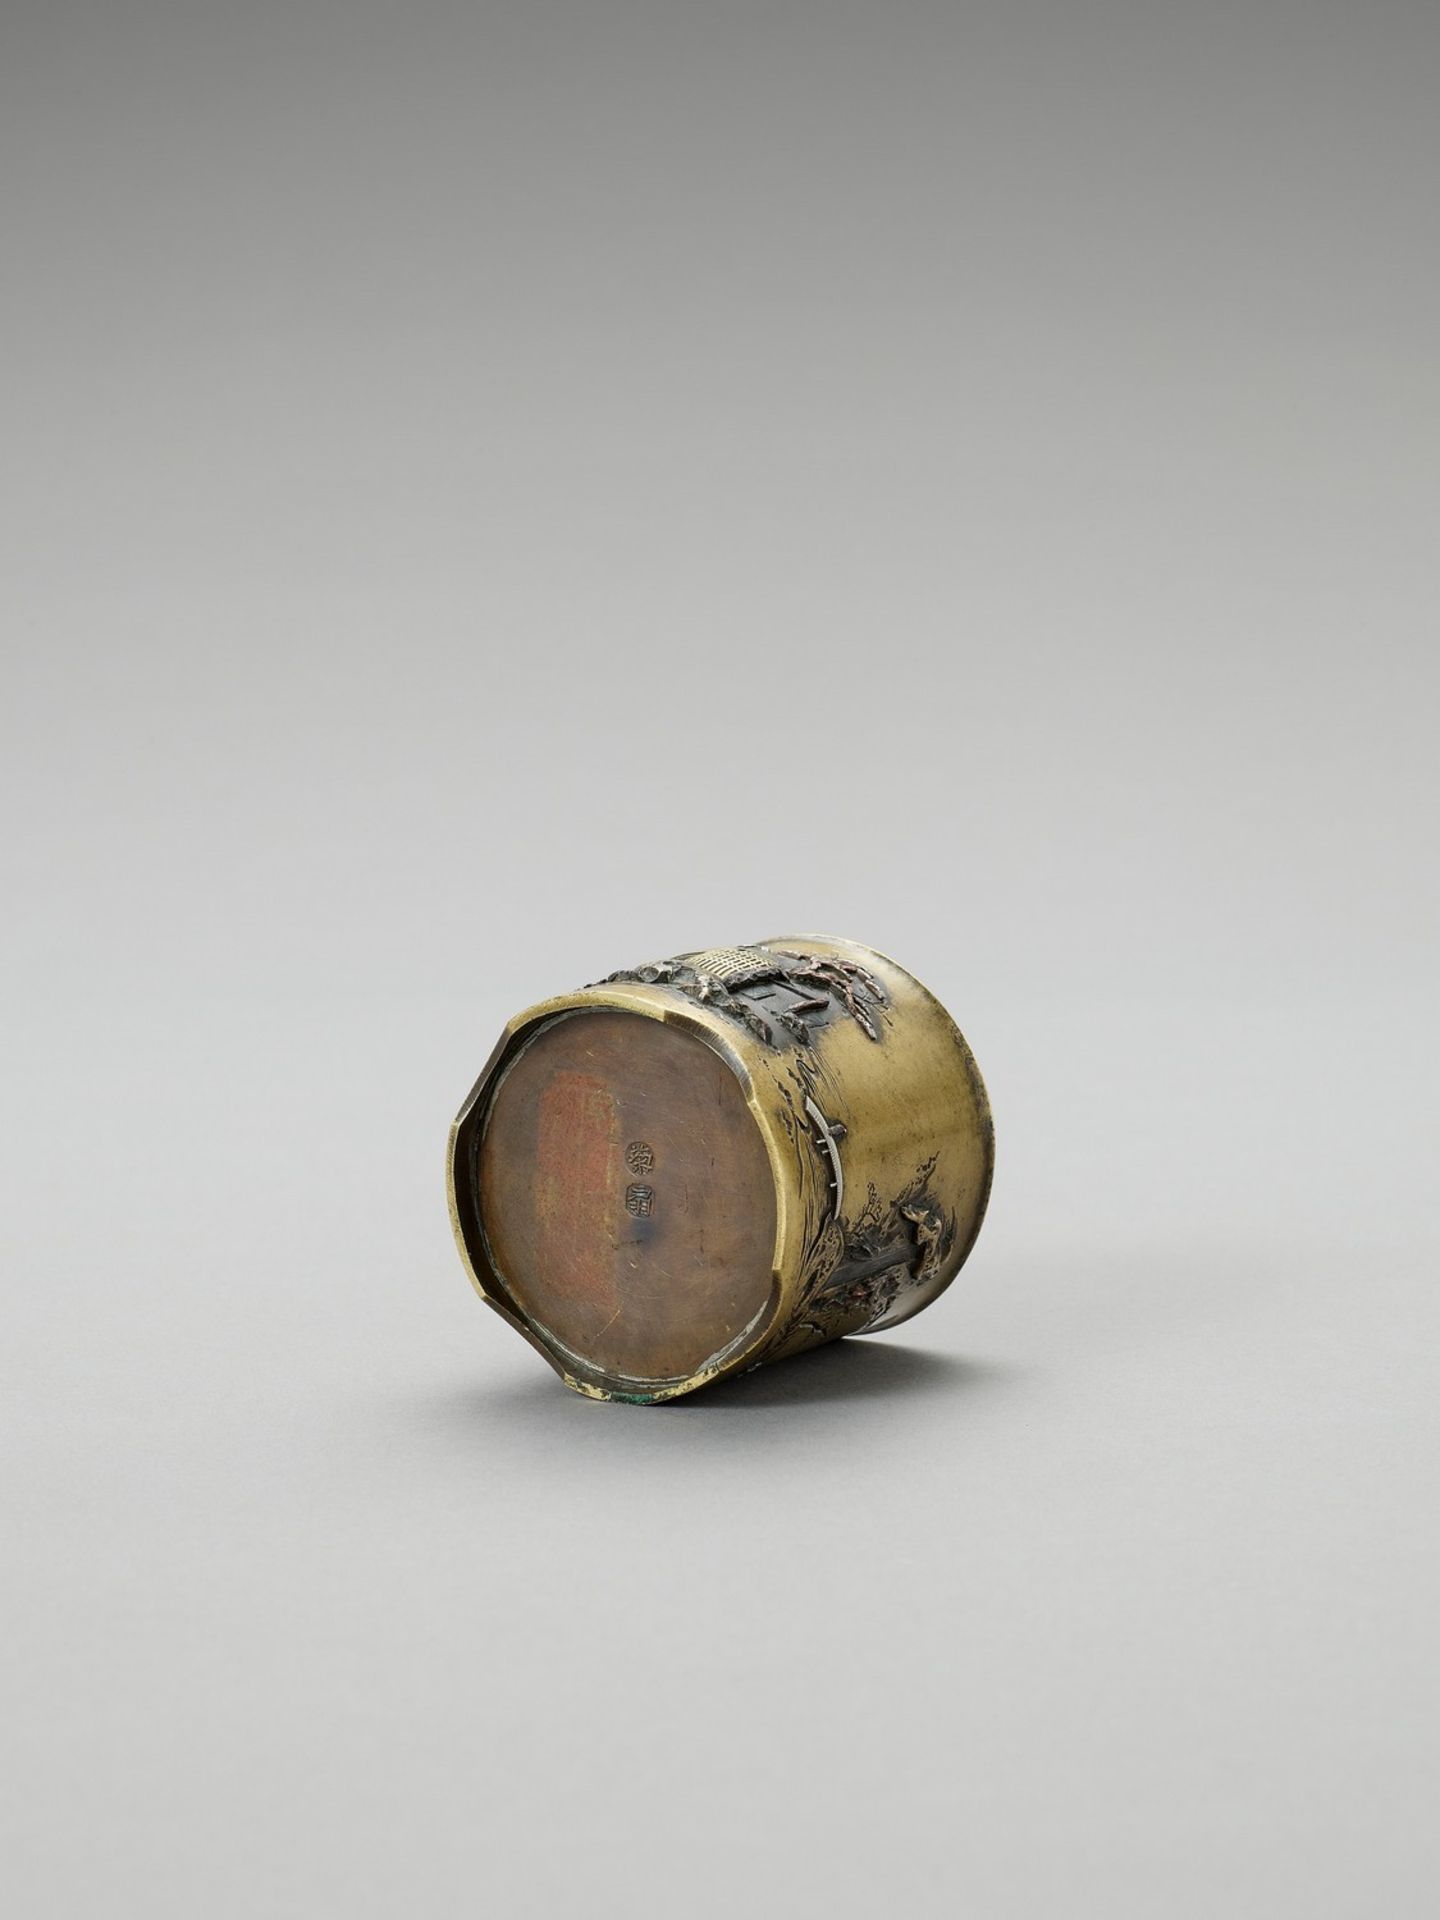 A SMALL SENTOKU VESSEL WITH SILVER AND COPPER INLAYS - Image 5 of 5